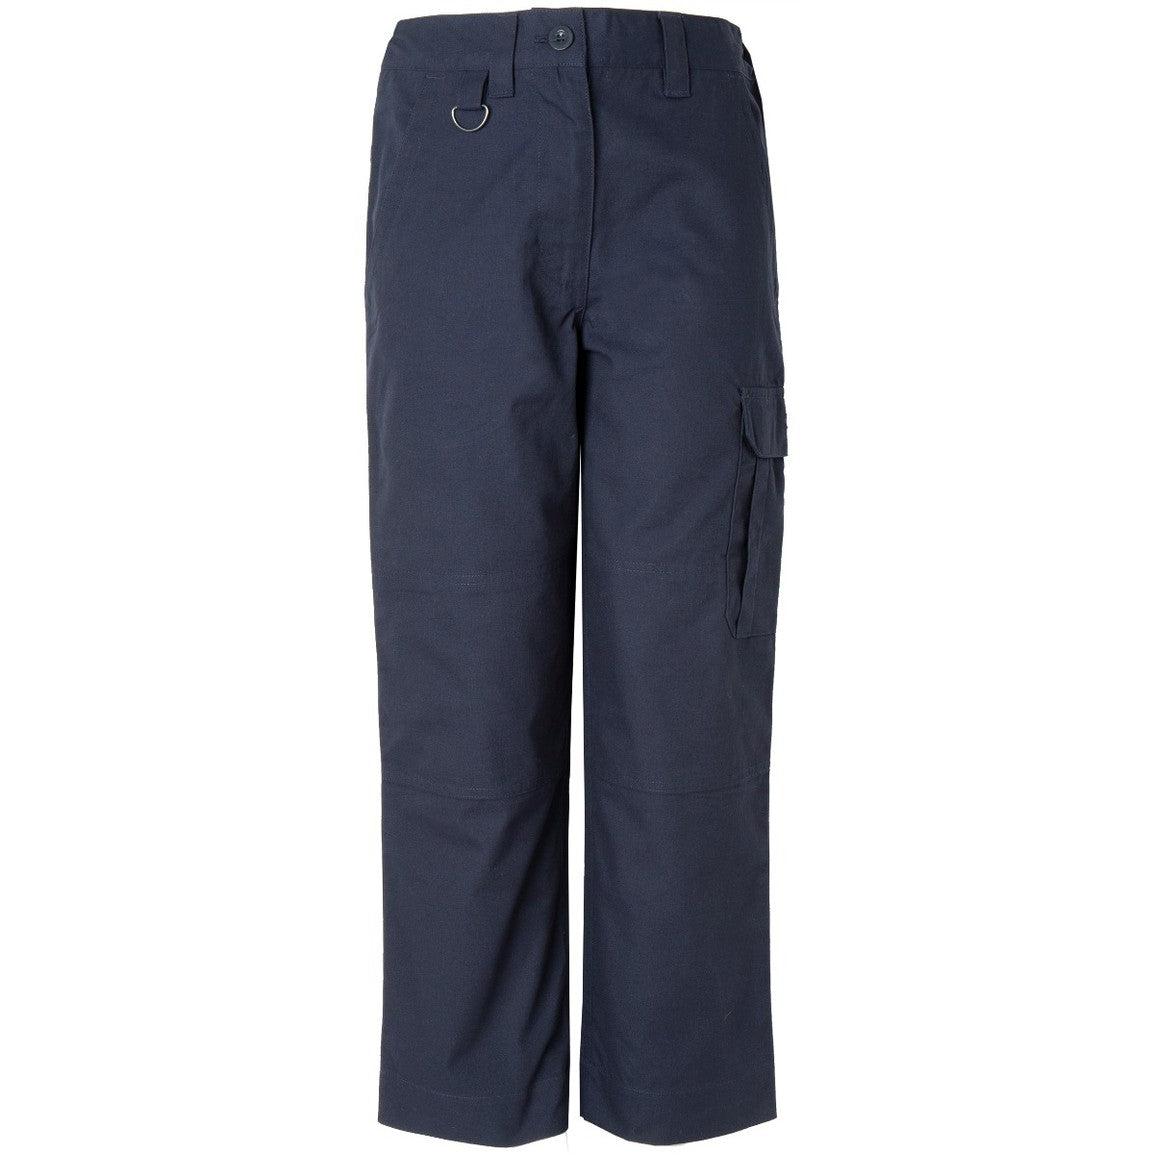 Scouts Activity Trousers - Girls